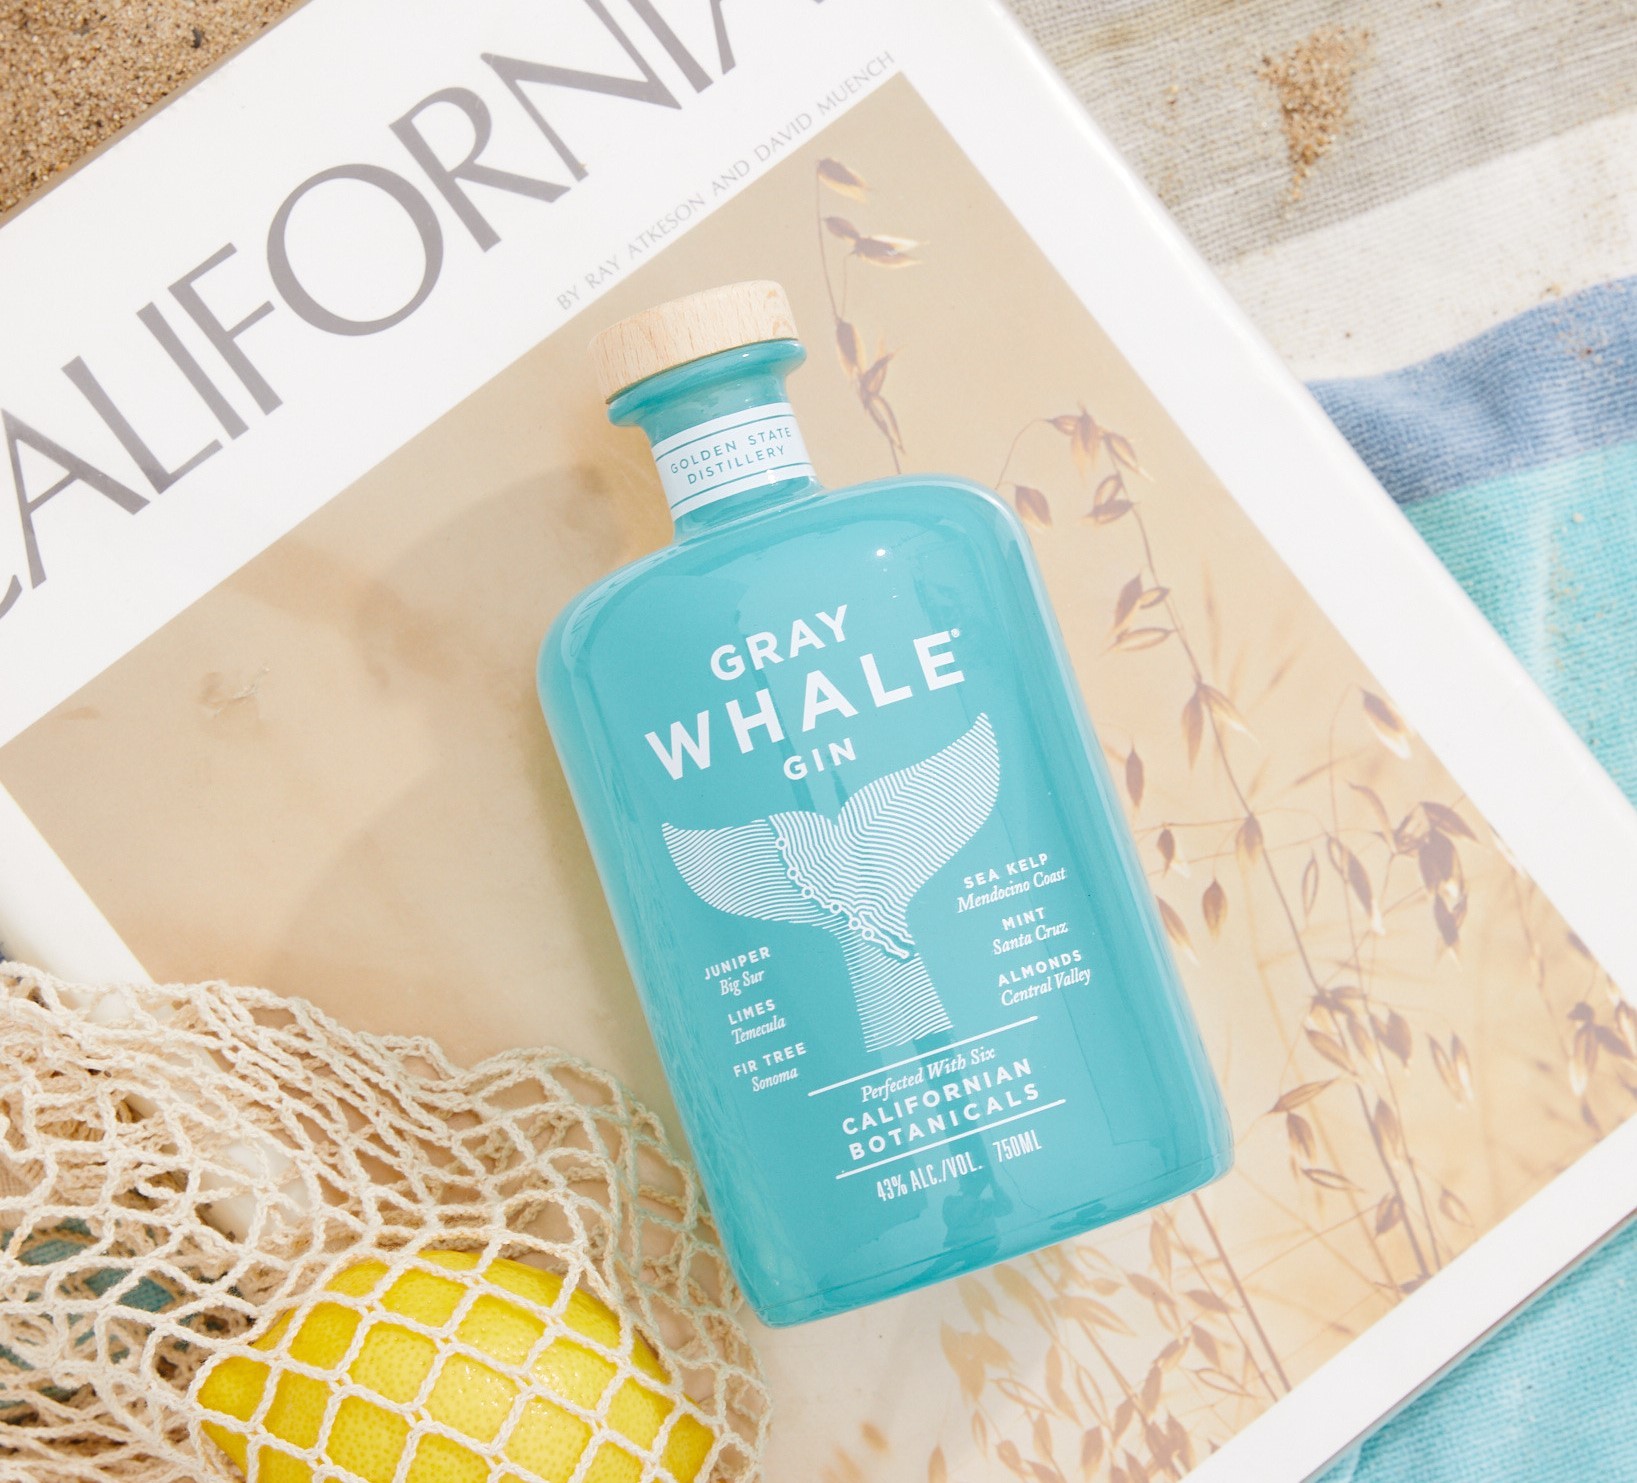 Celebrate World Oceans Day & World Gin Day With Gray Whale Gin